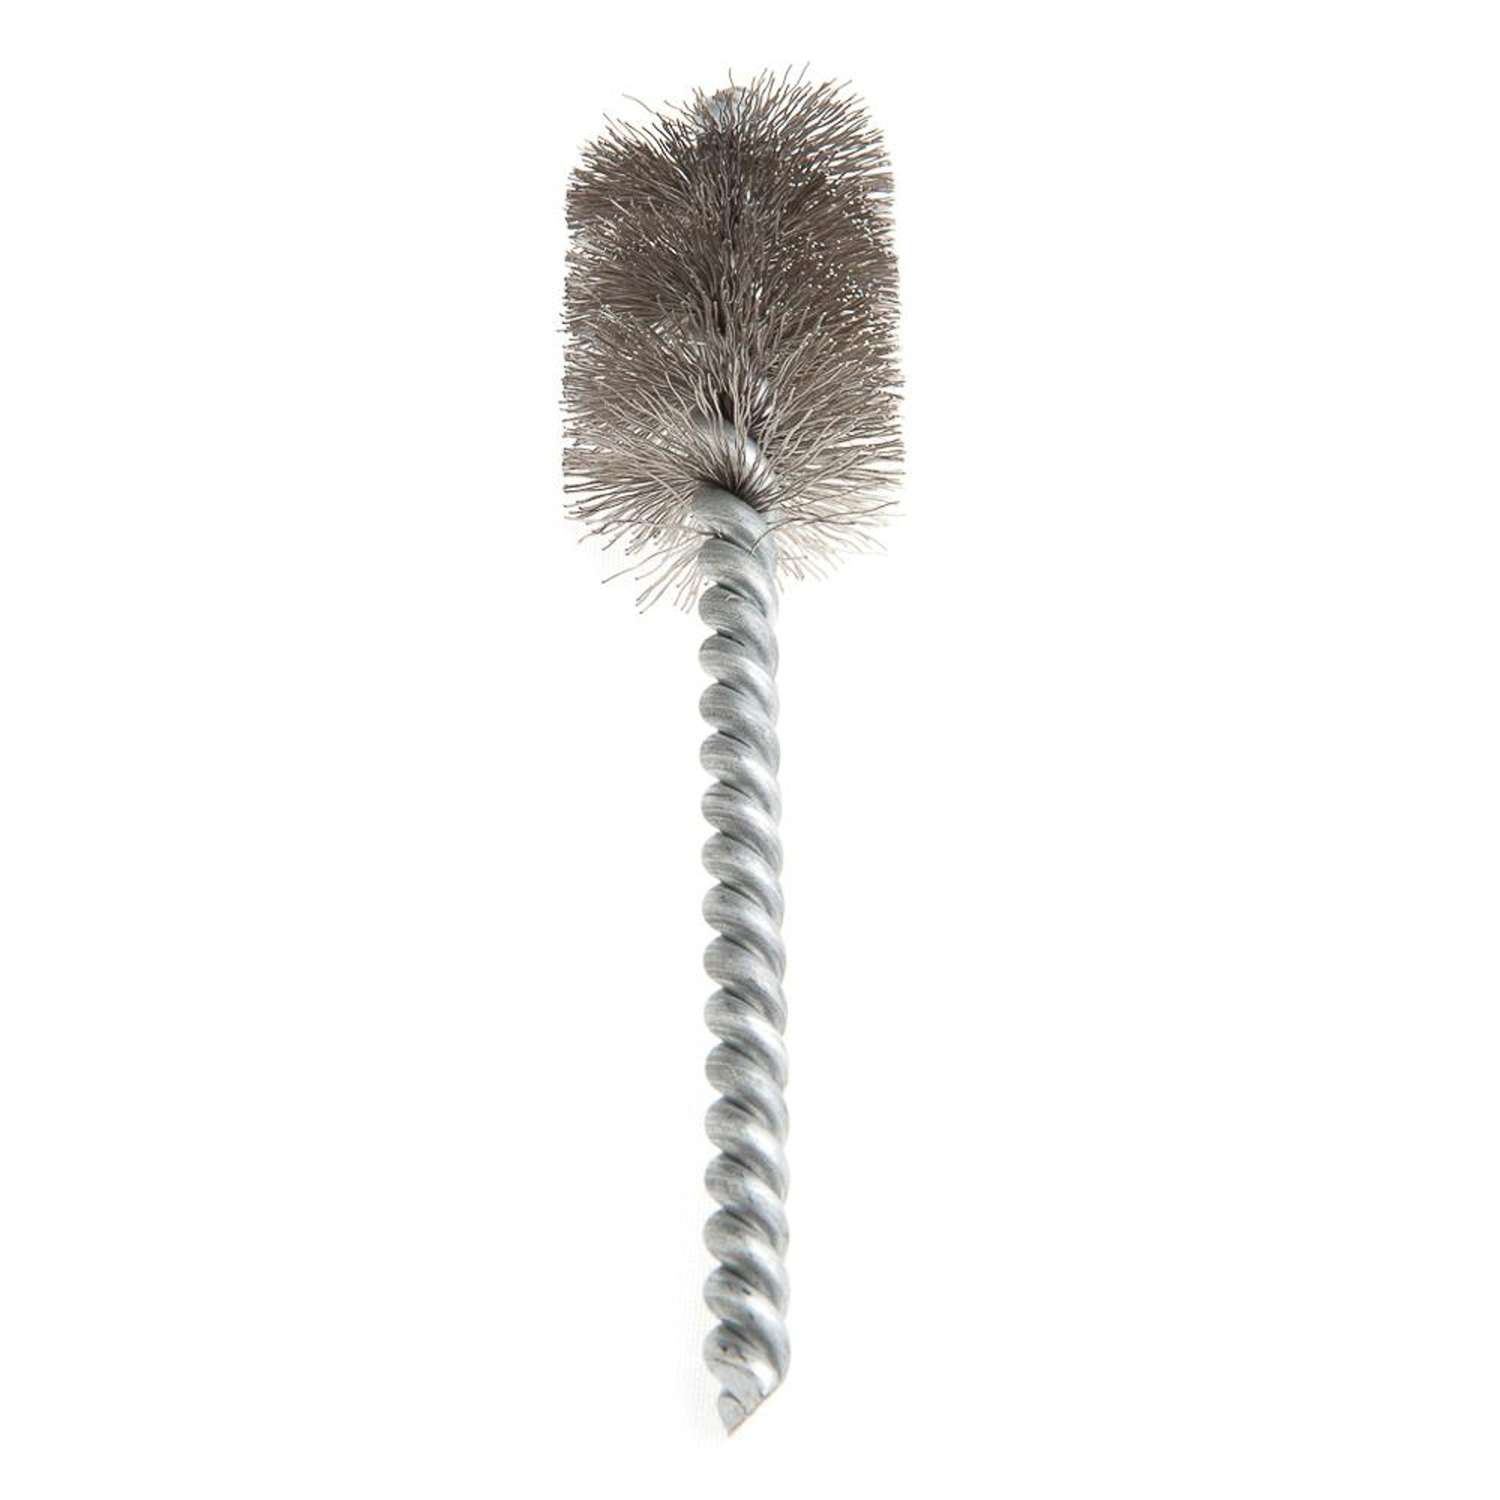 z 6 Pcs Stainless Steel Rifle Cleaning Picks Gun Cleaning Pick Brush Design-A@d